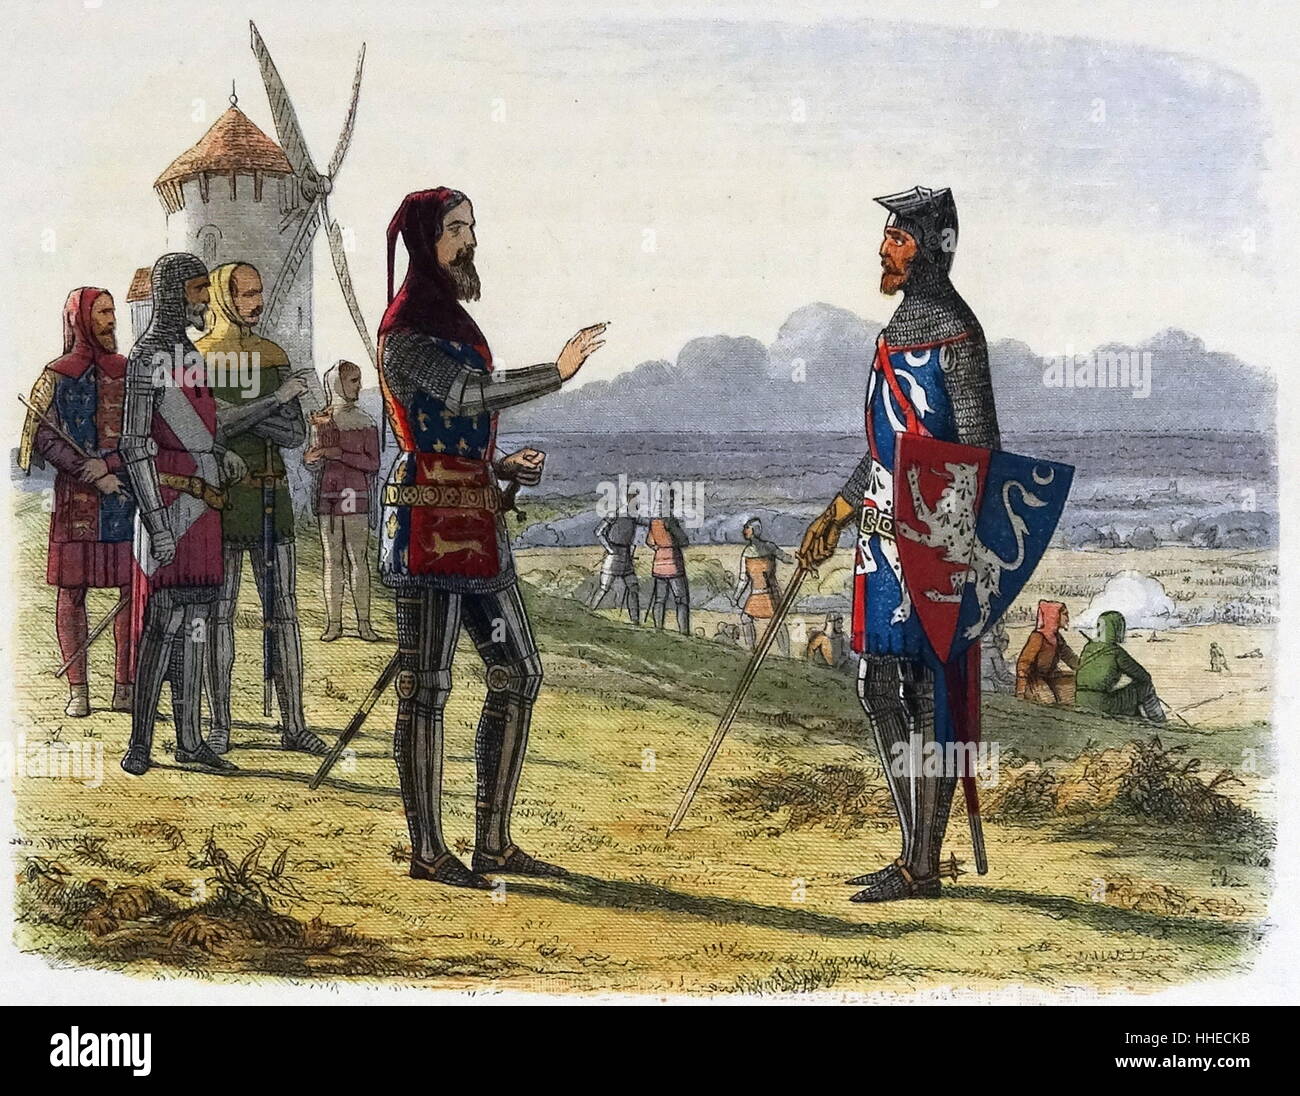 EDWARD III (1312-77), king of England from 1327. Shown here at battle of Crecy, 1346, during the HUNDRED YEARS WAR between England and France refusing to send aid to his son the Black Prince. Colour printed wood engraving circa 1860. Stock Photo